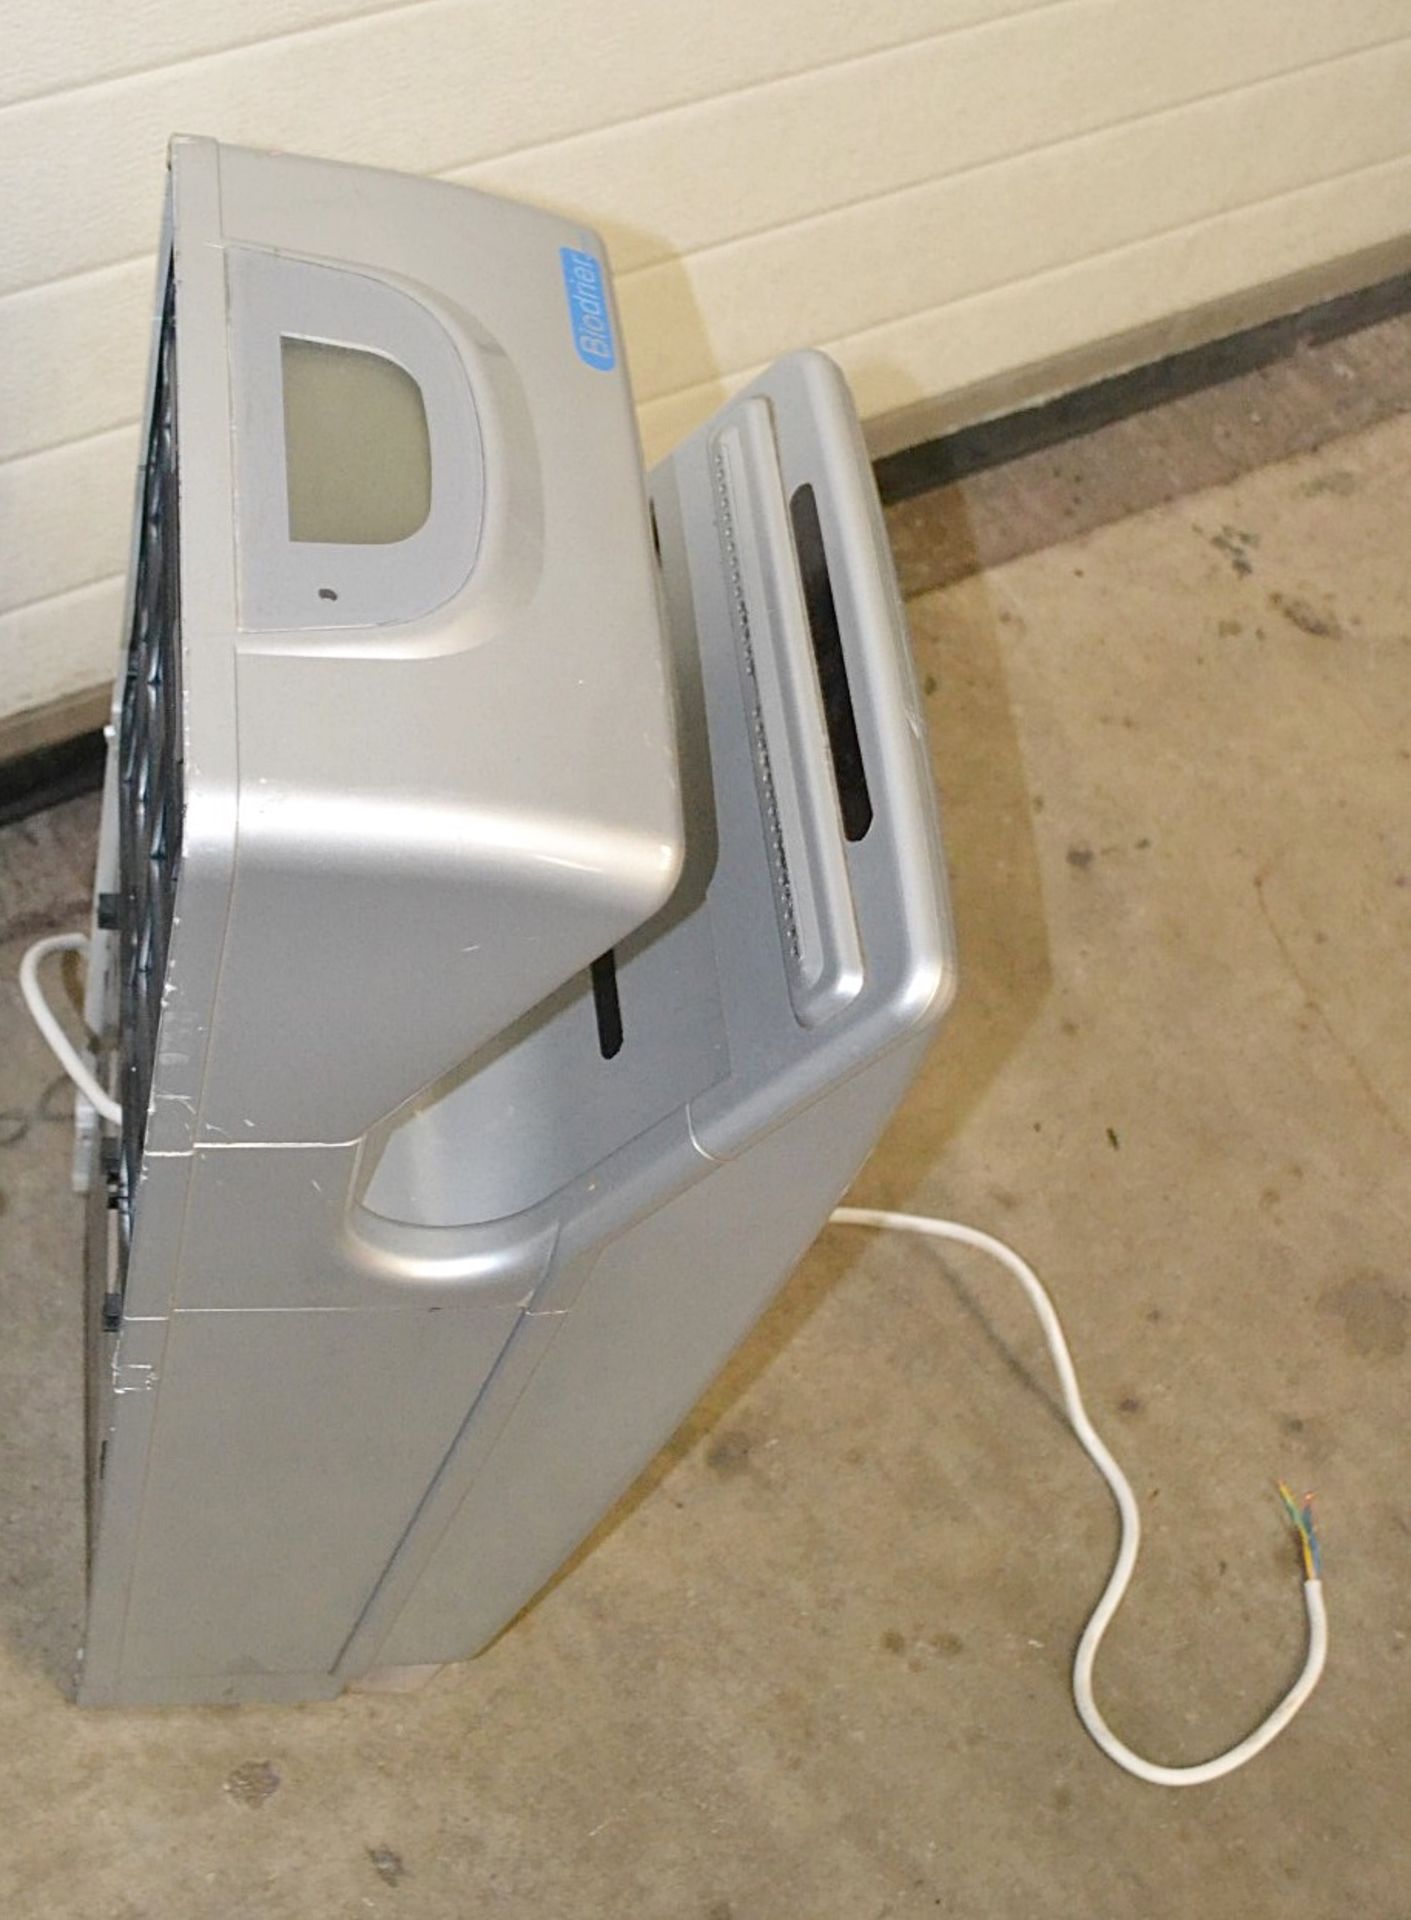 1 x BIODRIER Business Automatic Hand Dryer In Silver - Model: BB70S - Image 4 of 9